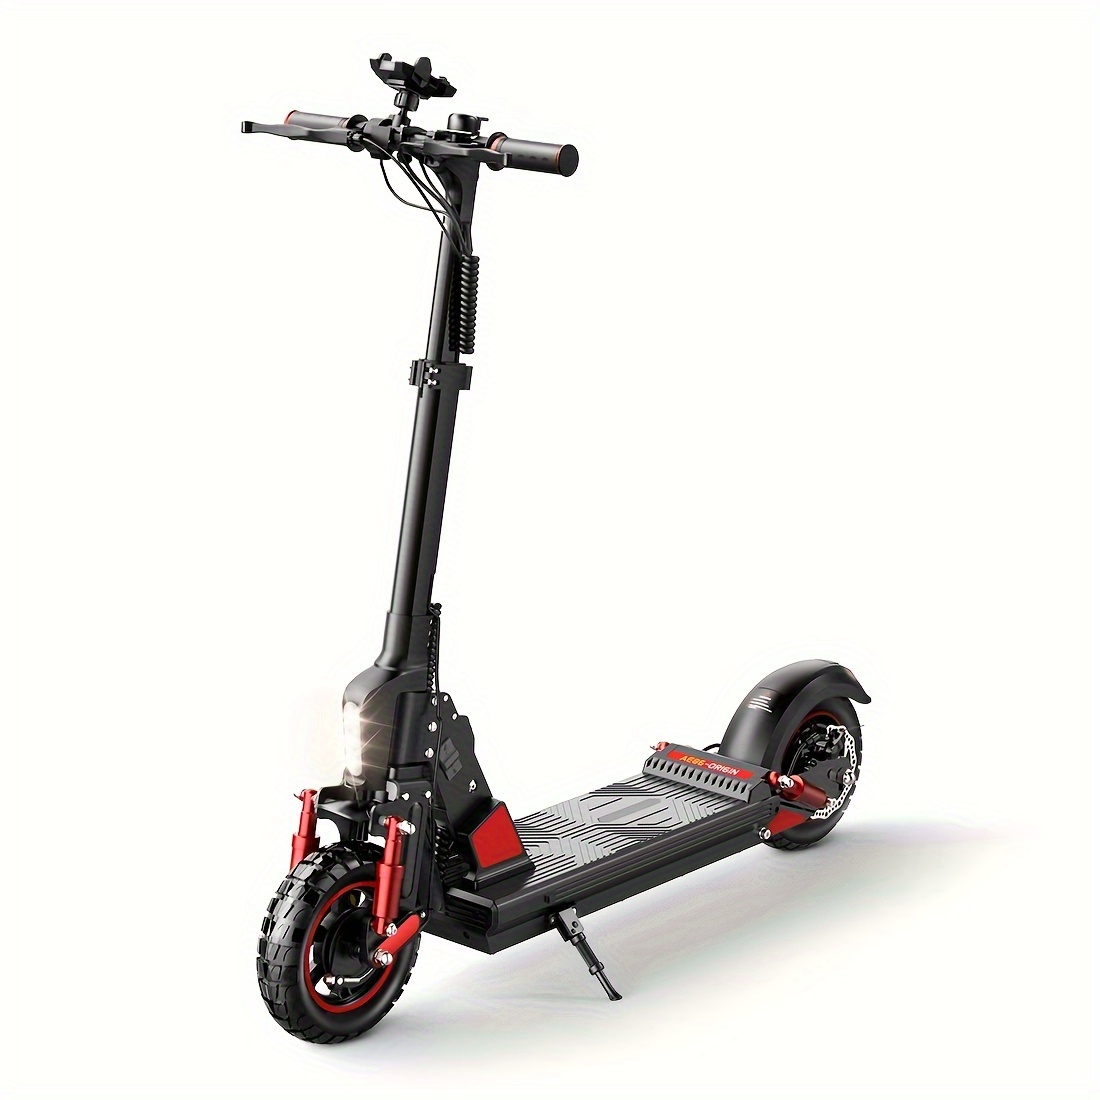 

500w 48v 13ah Electric Scooter, Fast-charging 500w Motorized Scooter, 24 Miles Range, 20mph Portable Folding Commuter Electric Scooter For Adults, Dual Suspension Braking With Front Bag Phone Rack